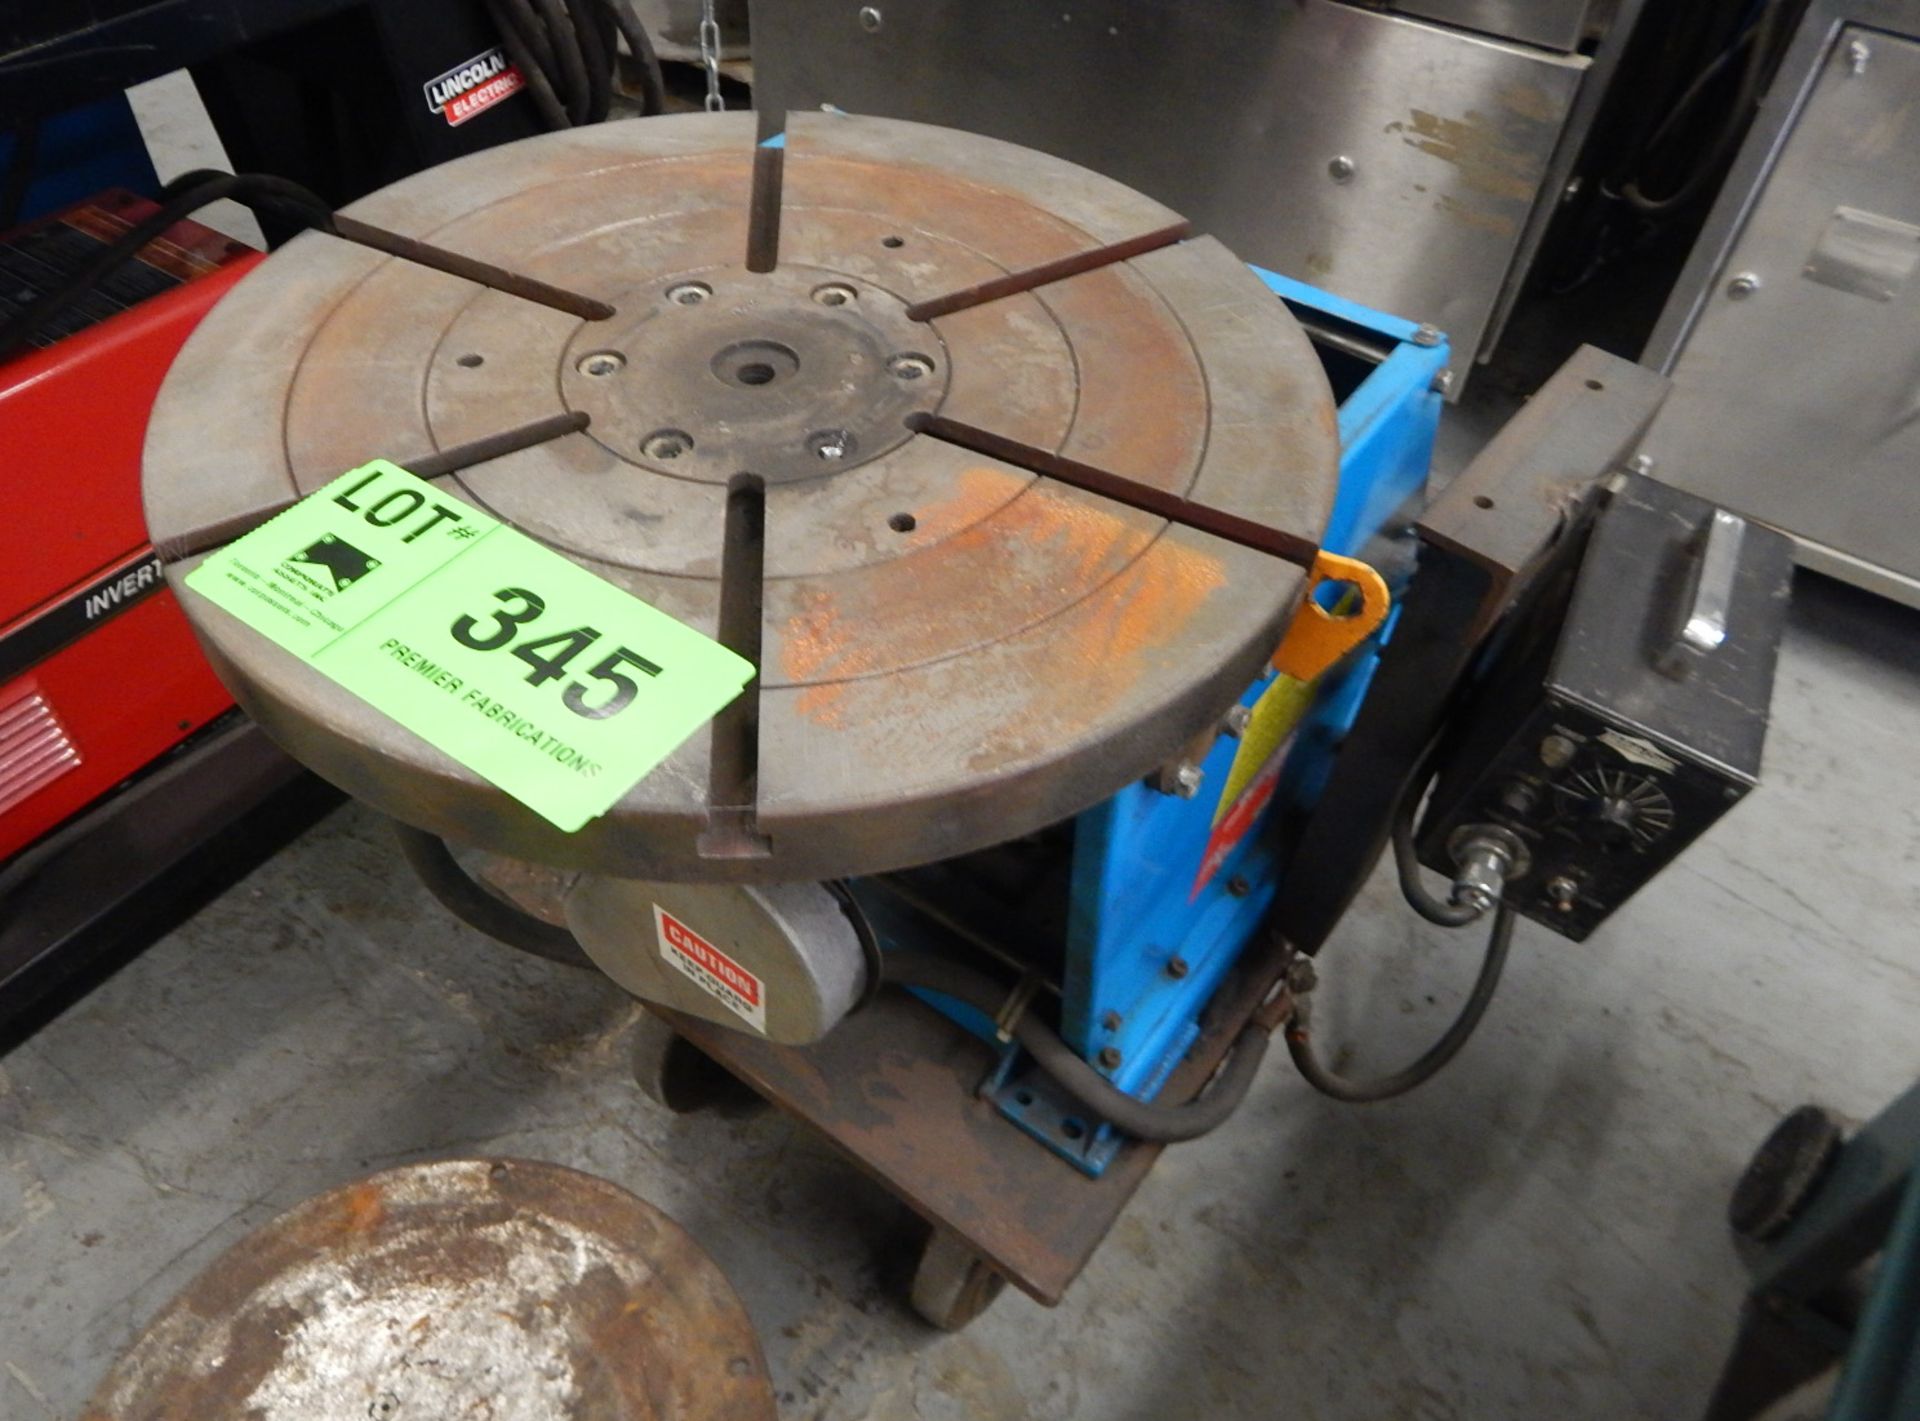 ALL-FAB CORP 17" ROTARY TURN TABLE WELDING POSITIONER WITH 500LBS. CAPACITY S/N: N/A